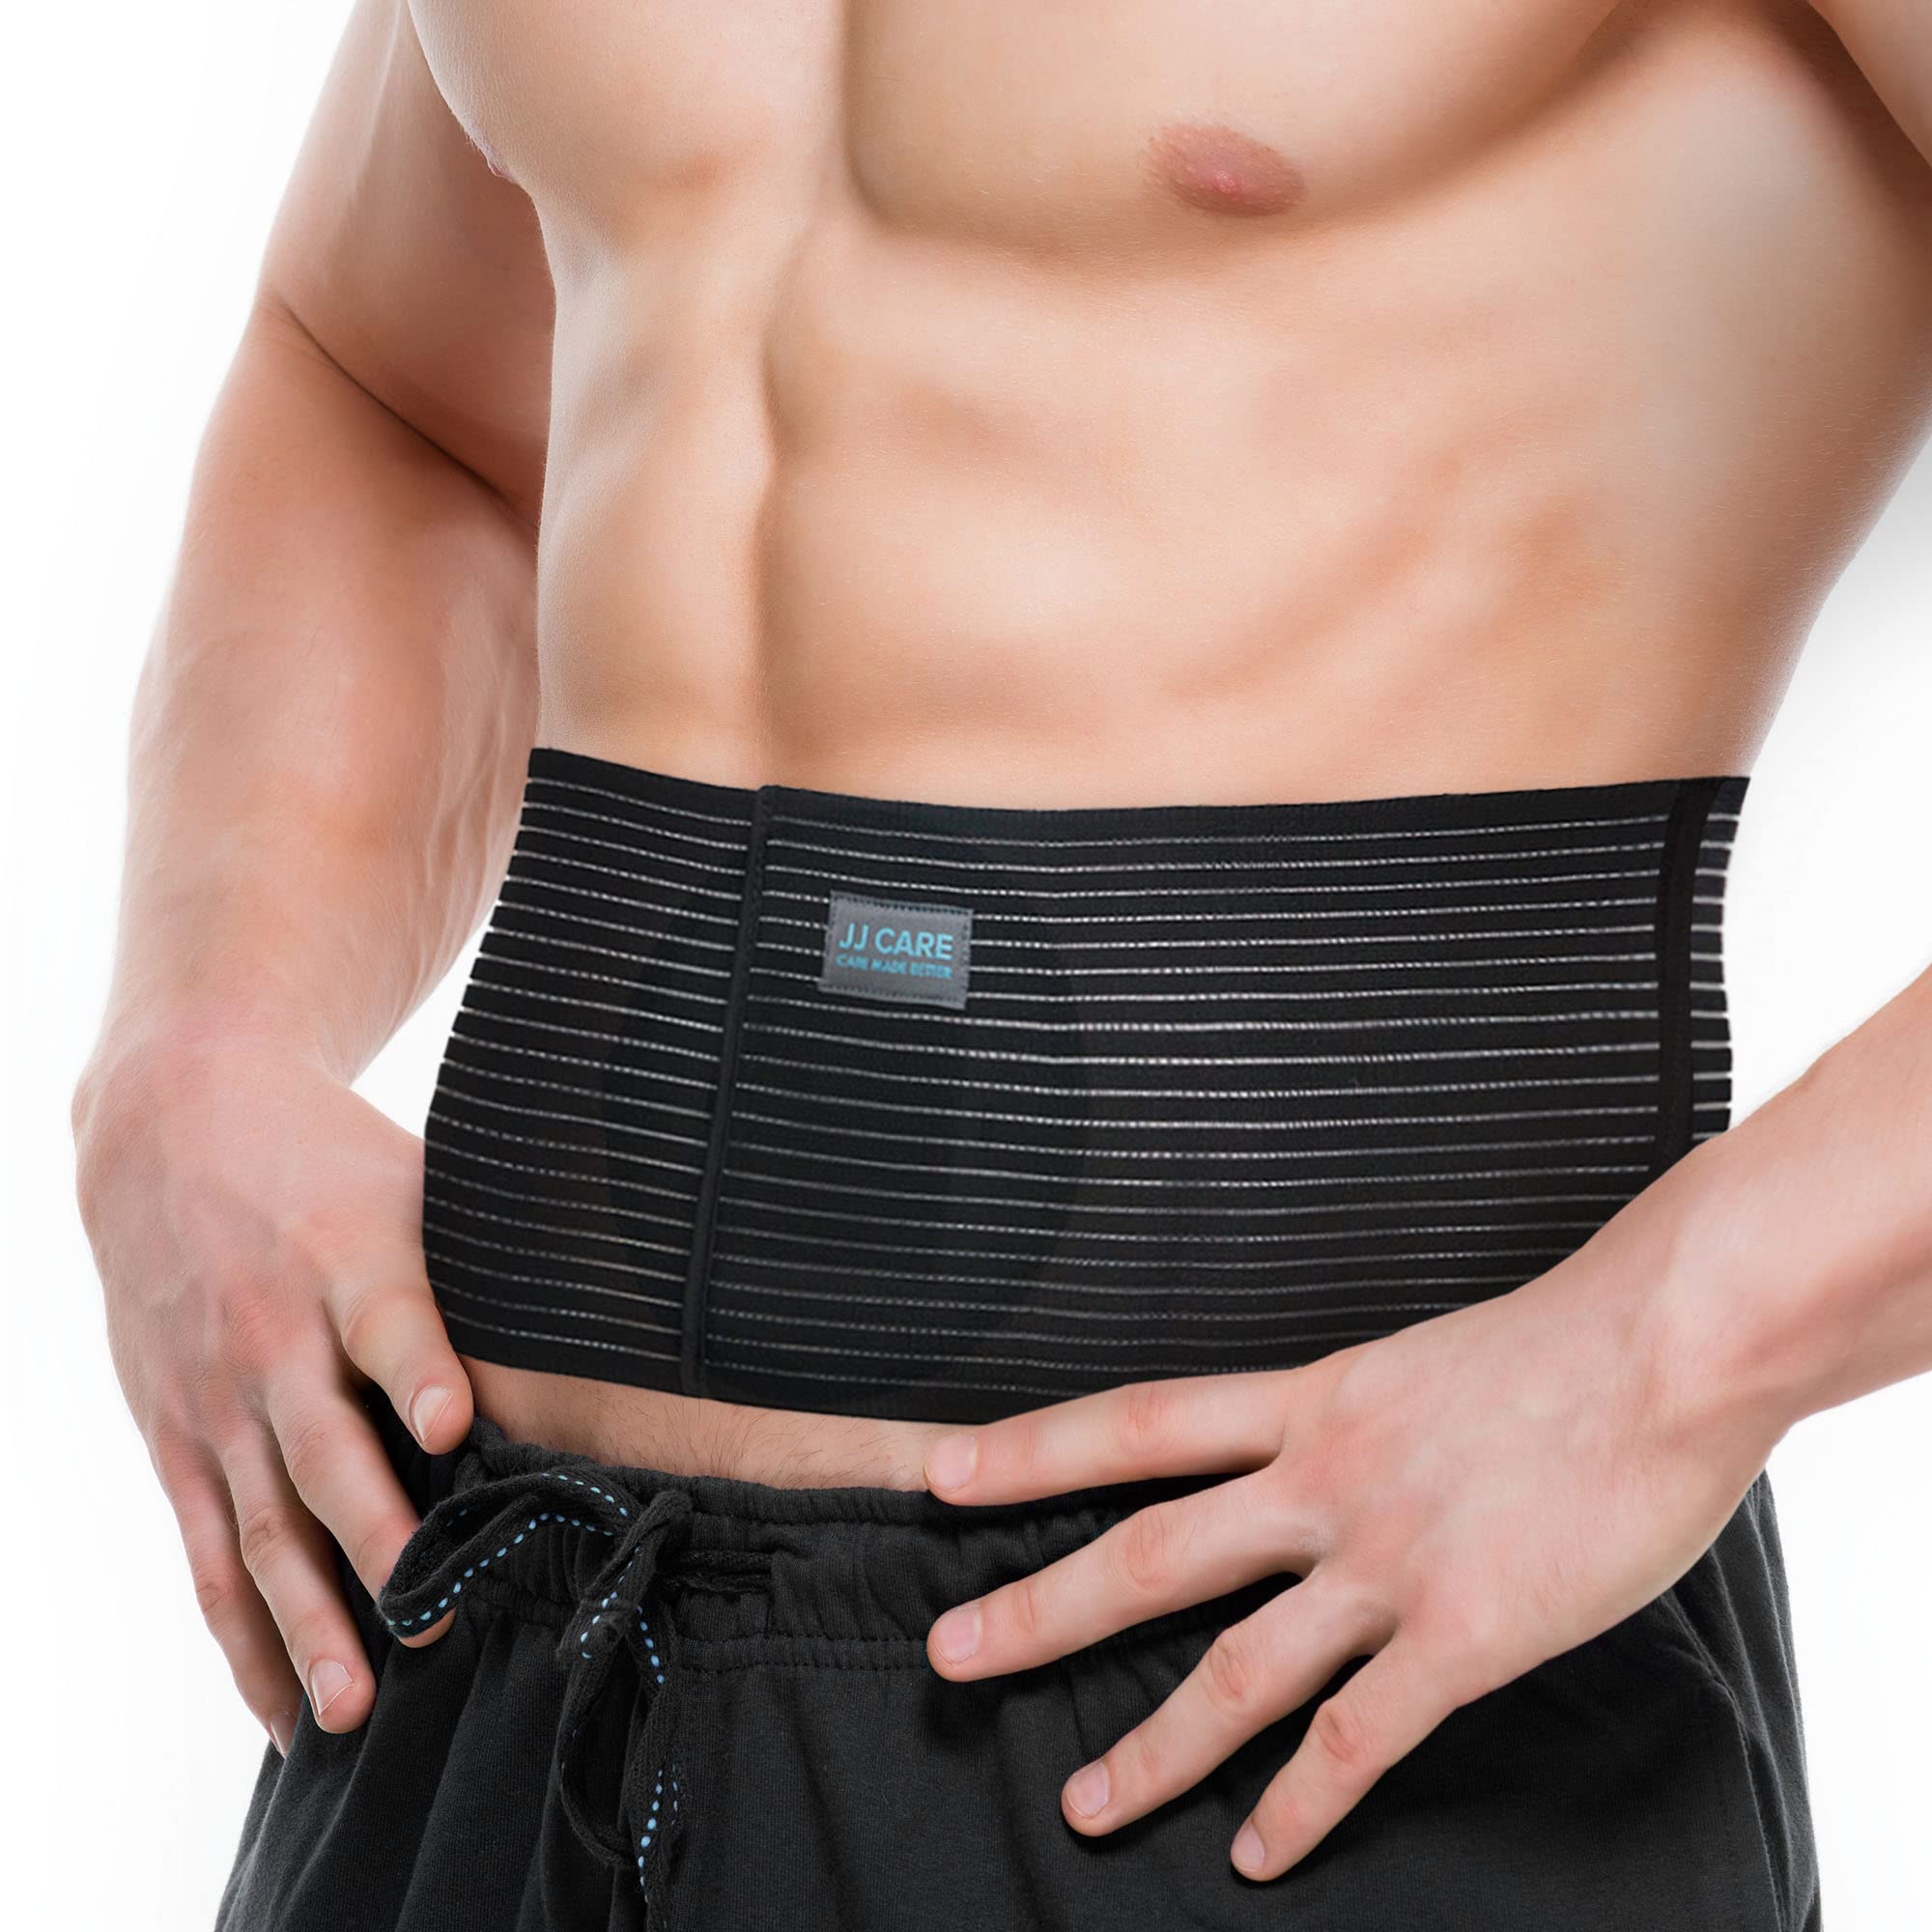 Buy AT Surgical Abdominal Hernia Belt for Umbilical Hernia